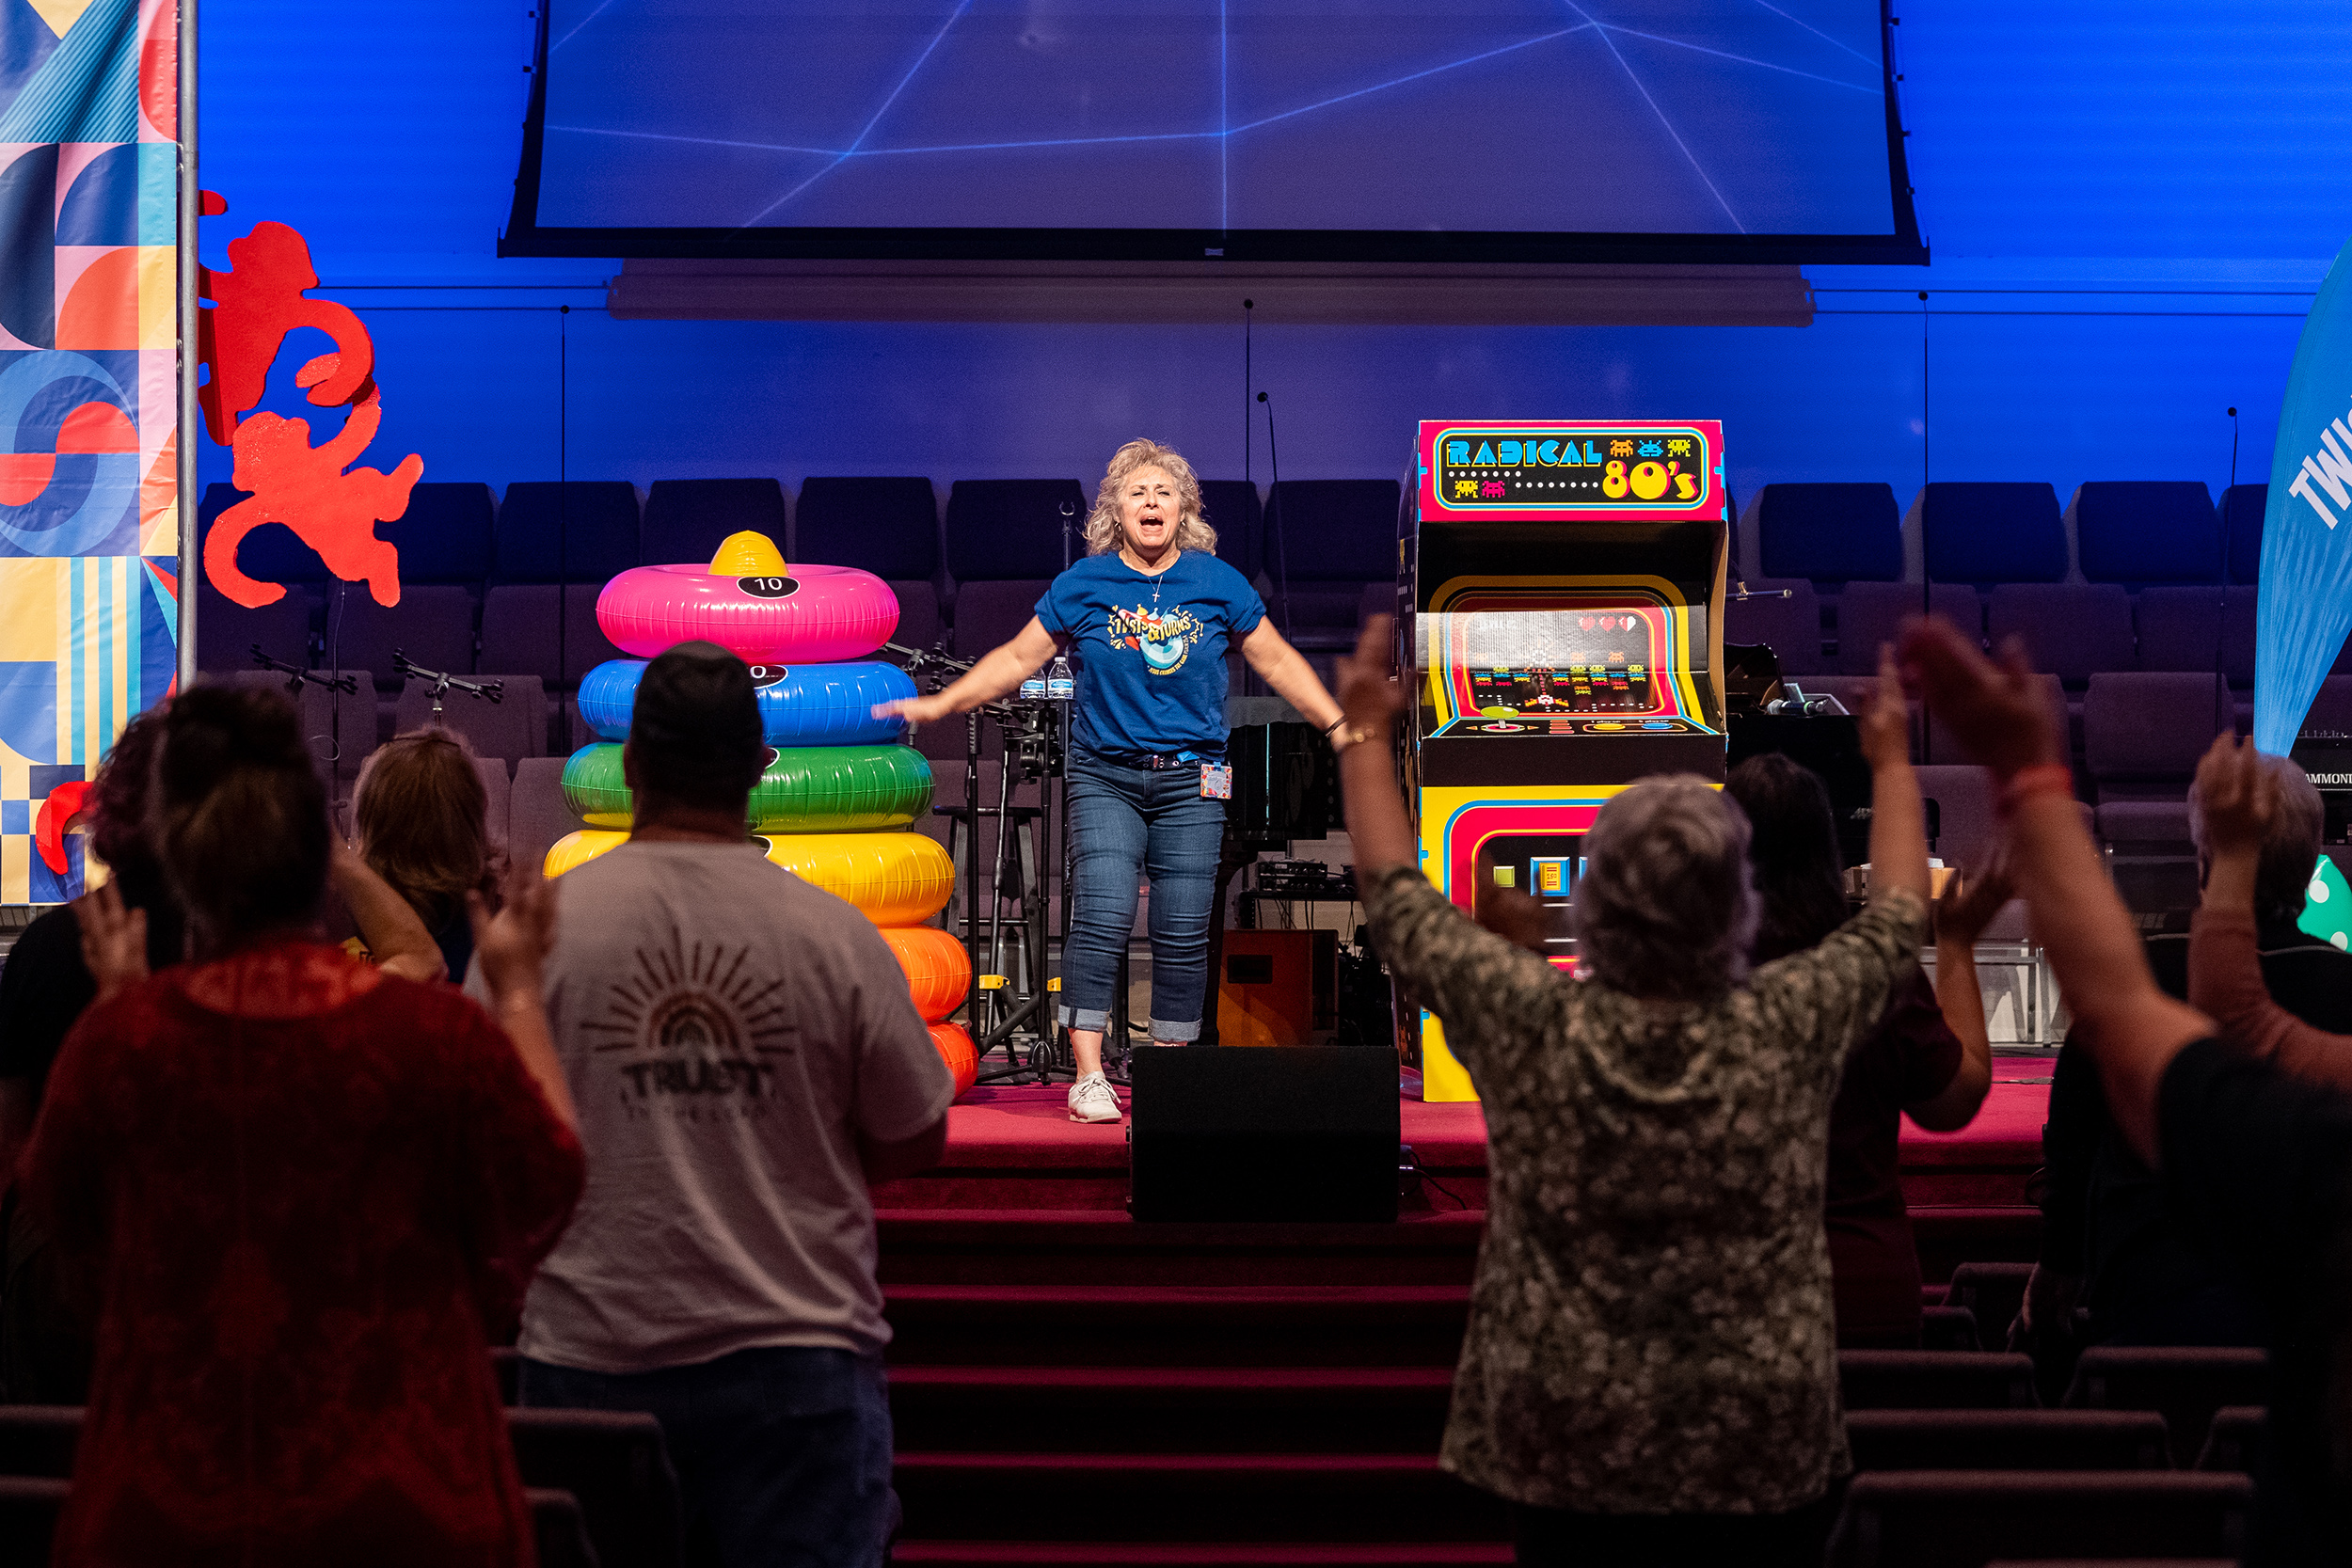 VBS Expo: Equipping Church Leaders for a Fun and Gospel-filled Summer